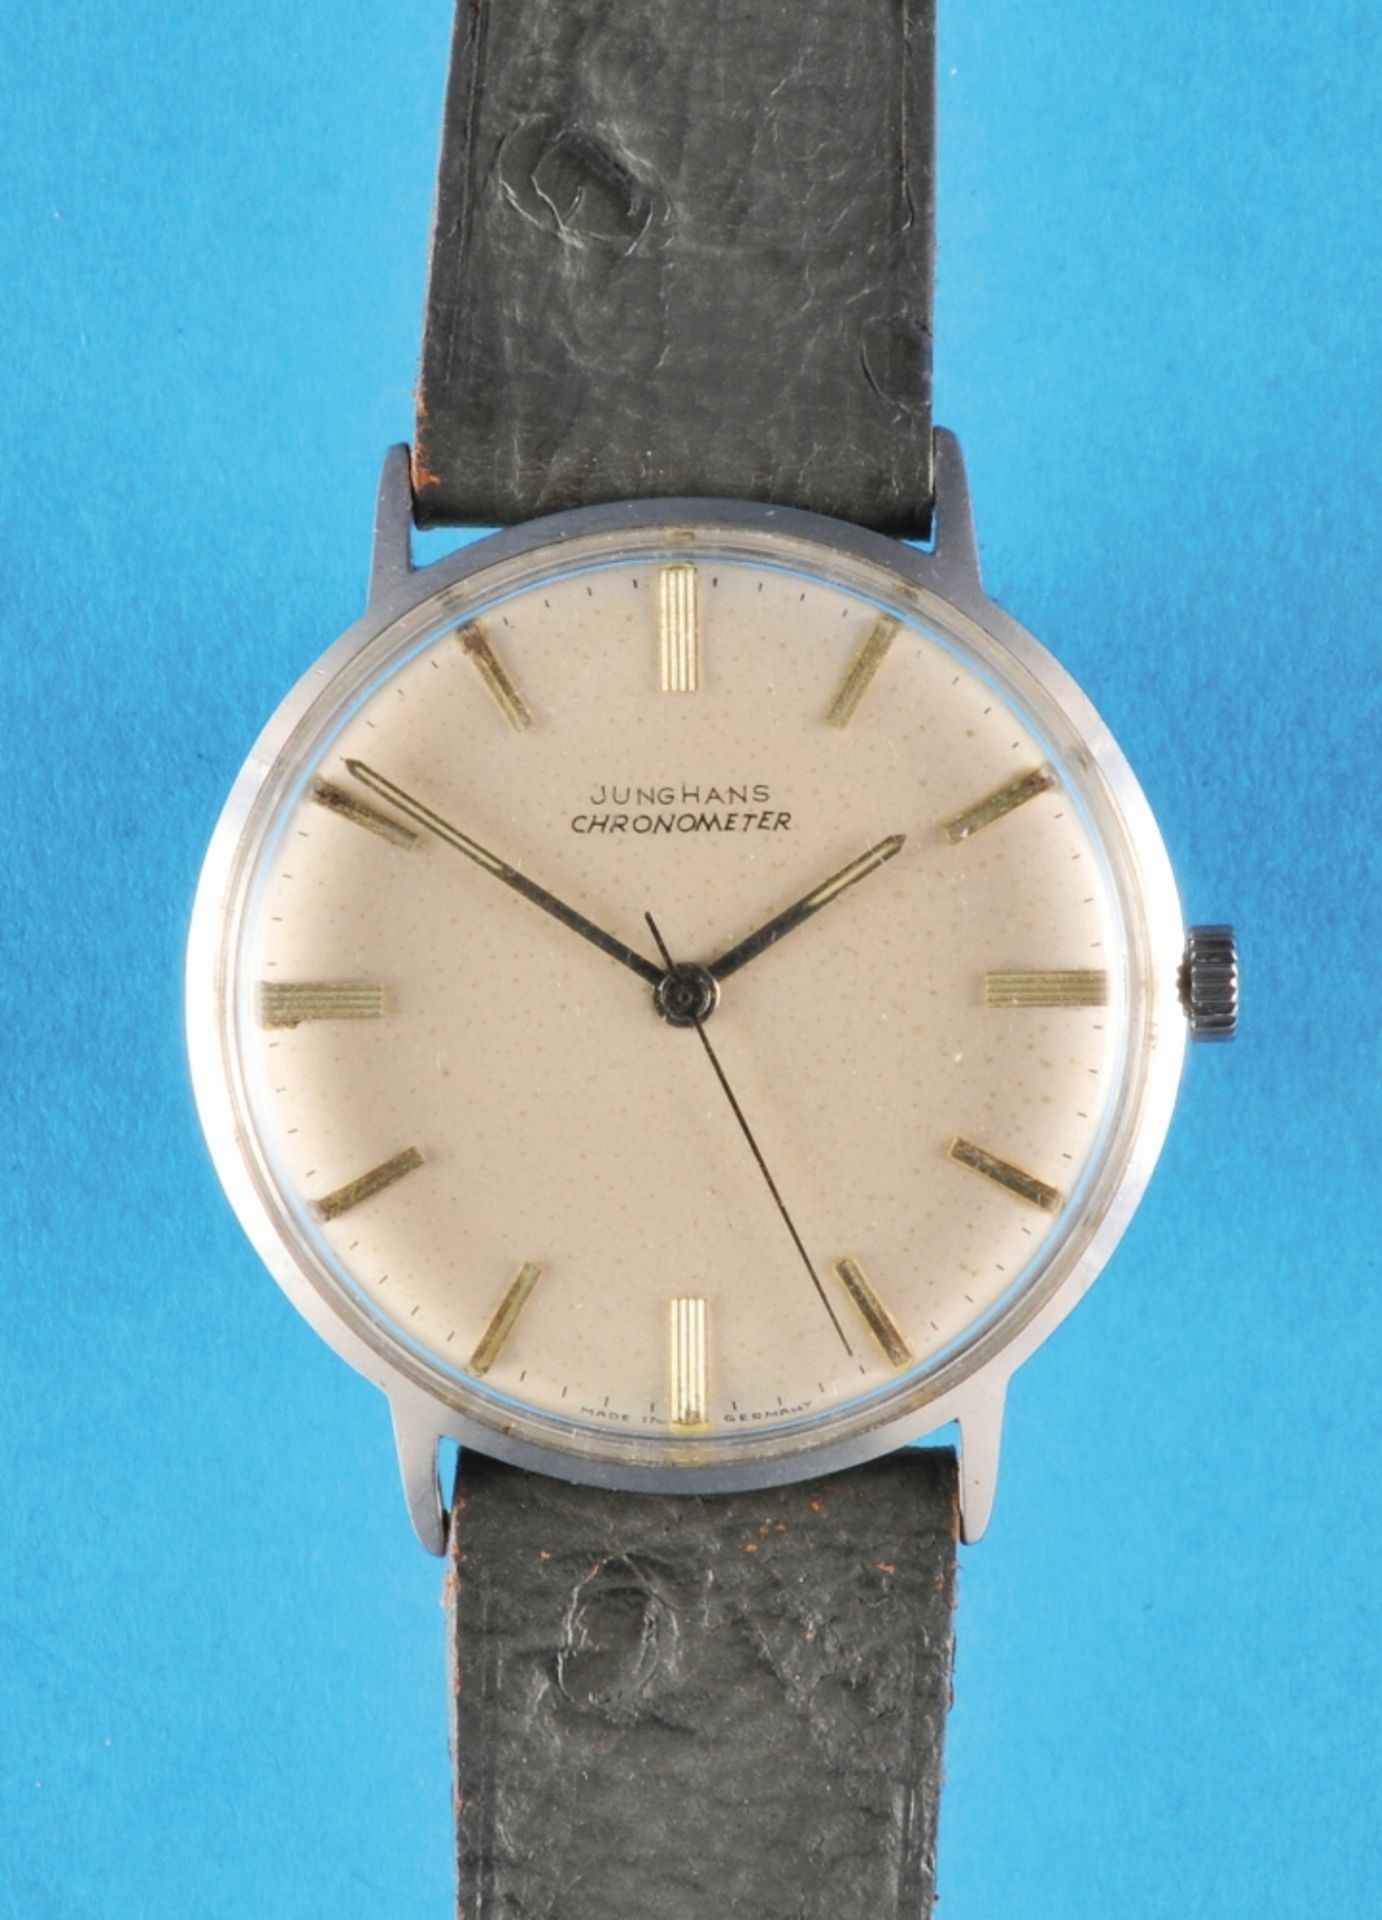 Junghans Chronometer wristwatch with center second